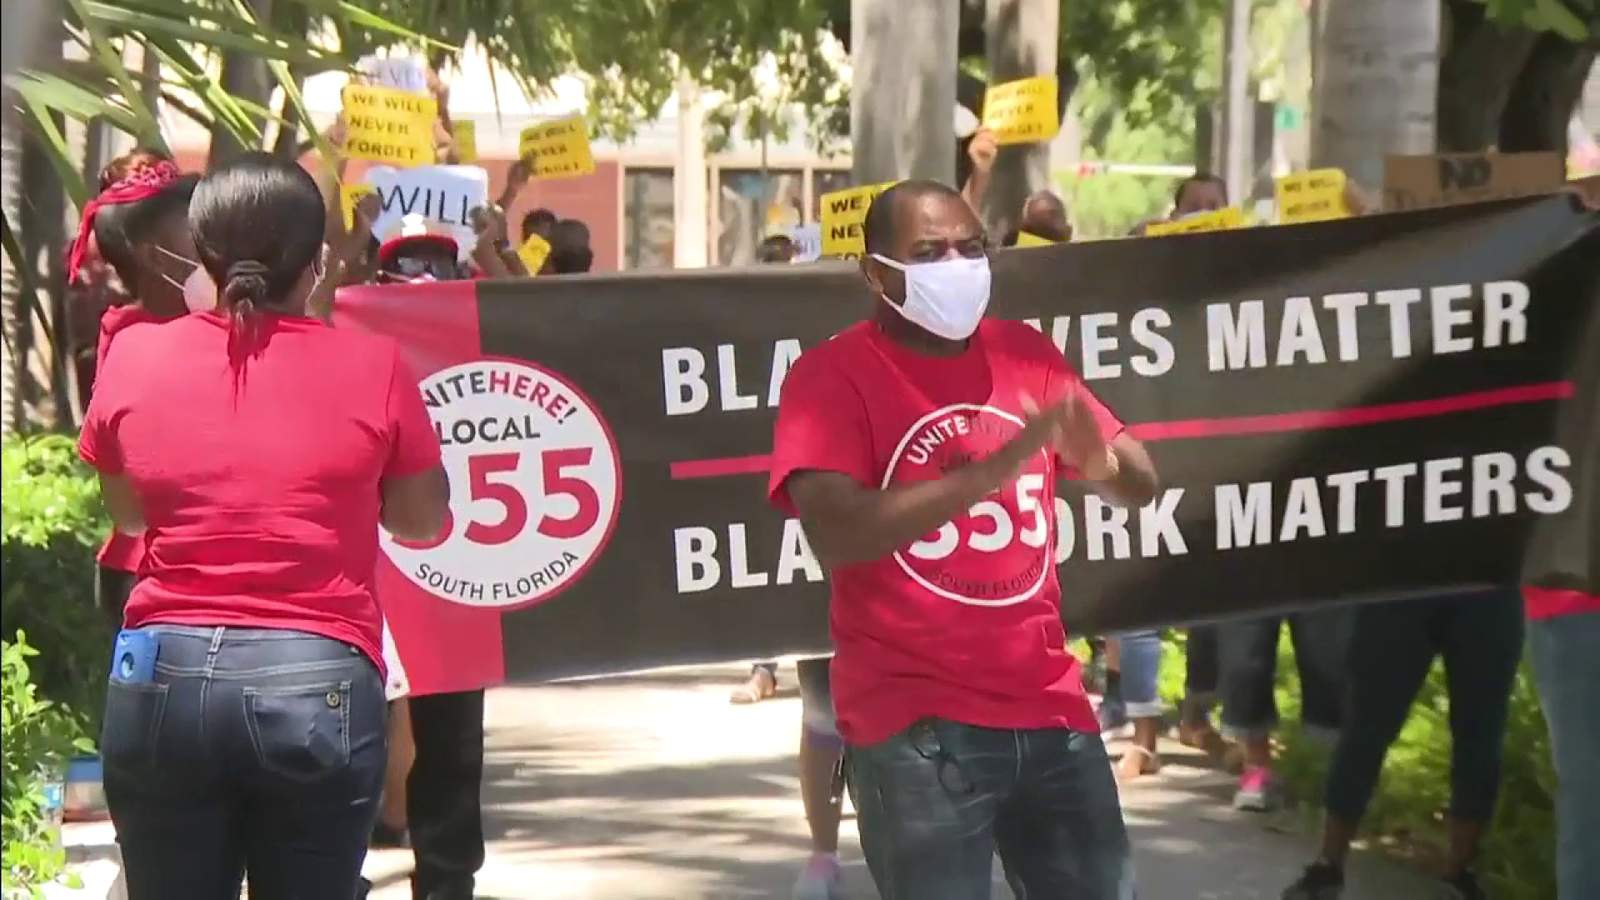 Hospitality industry workers without health insurance or unemployment benefits: Black Lives Matter!'